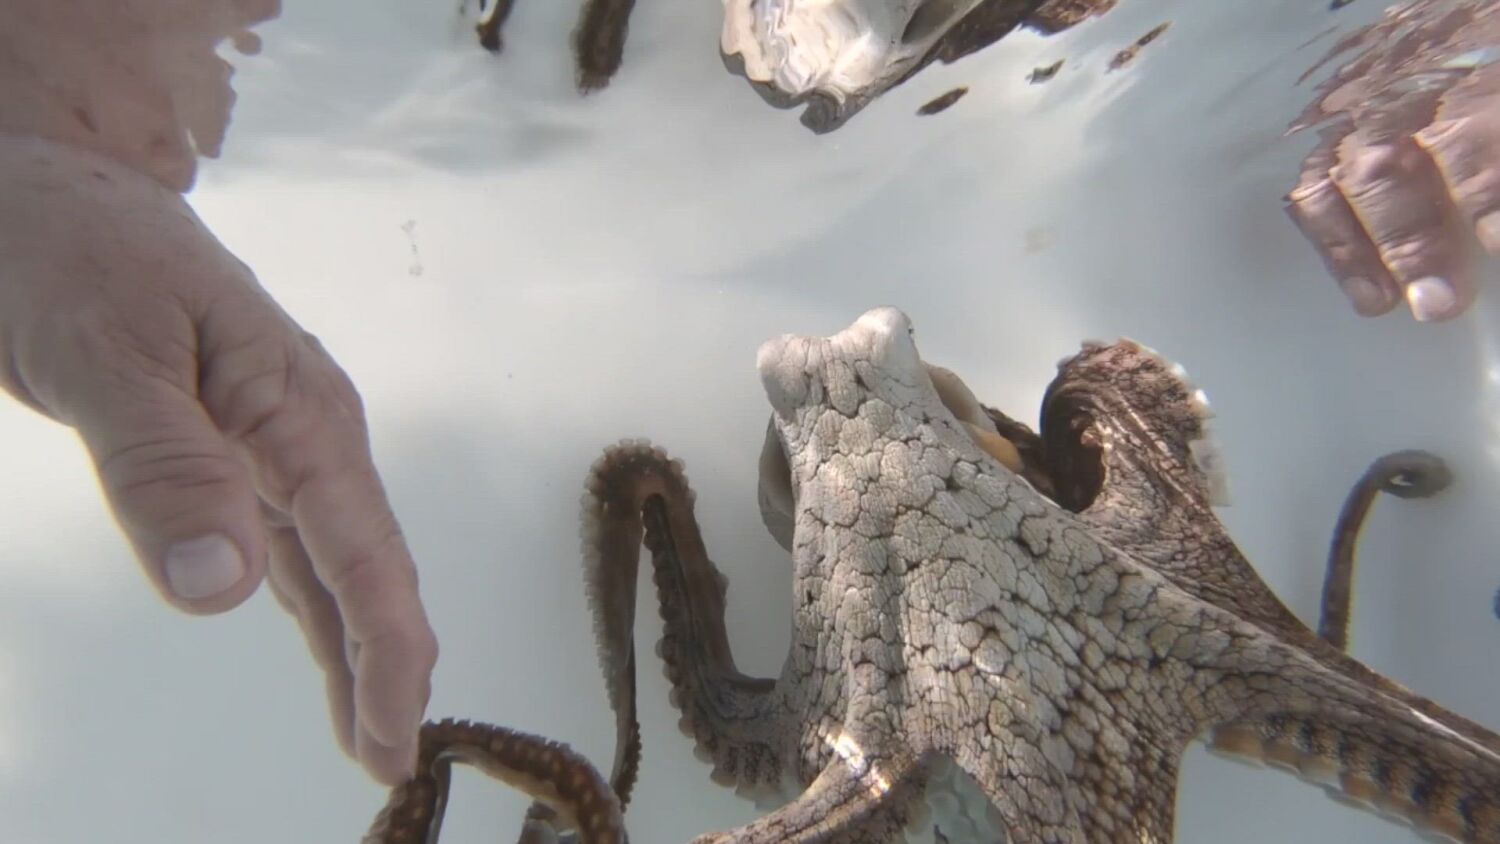 Farm-bred octopus: A benefit to the species or an act of cruelty? 